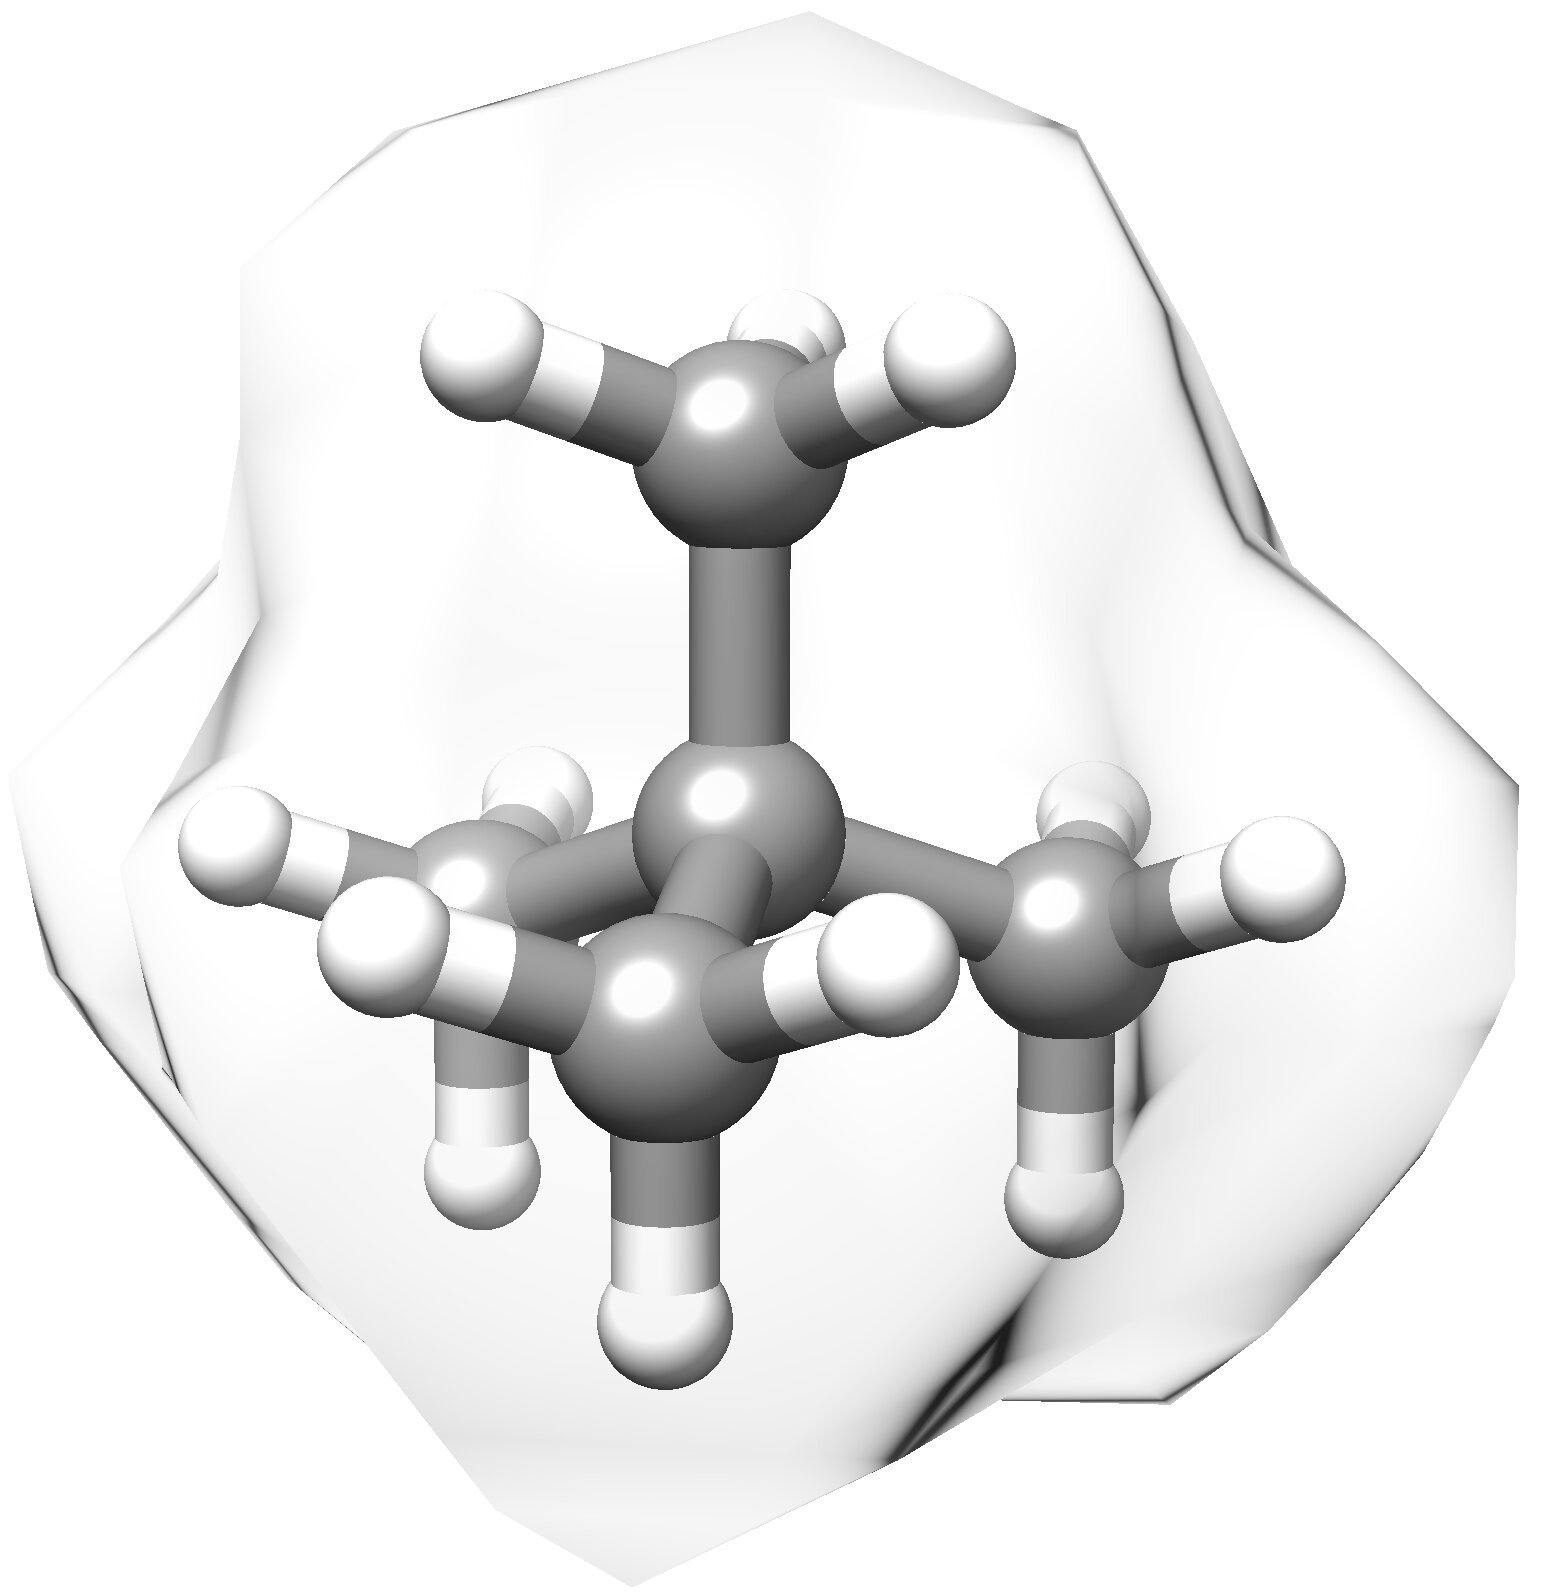 A simple, inexpensive way to make carbon atoms bind together